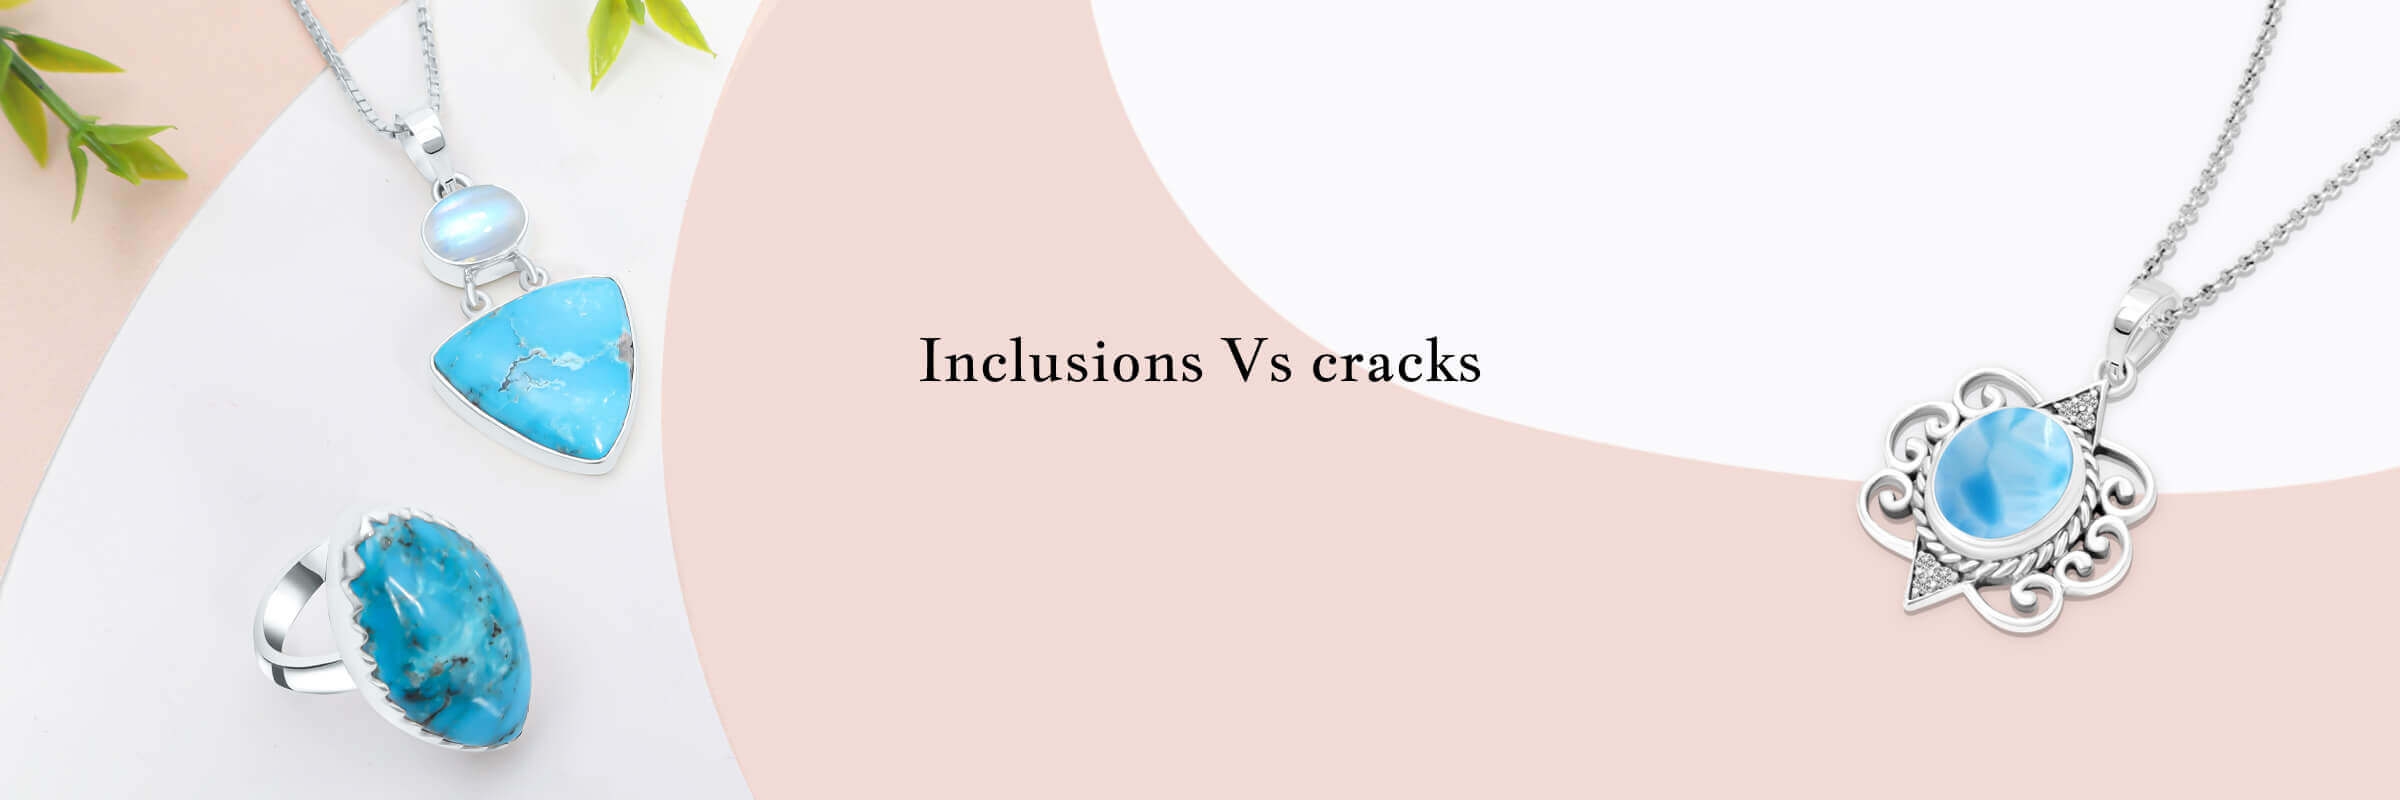 differences between Inclusions and cracks